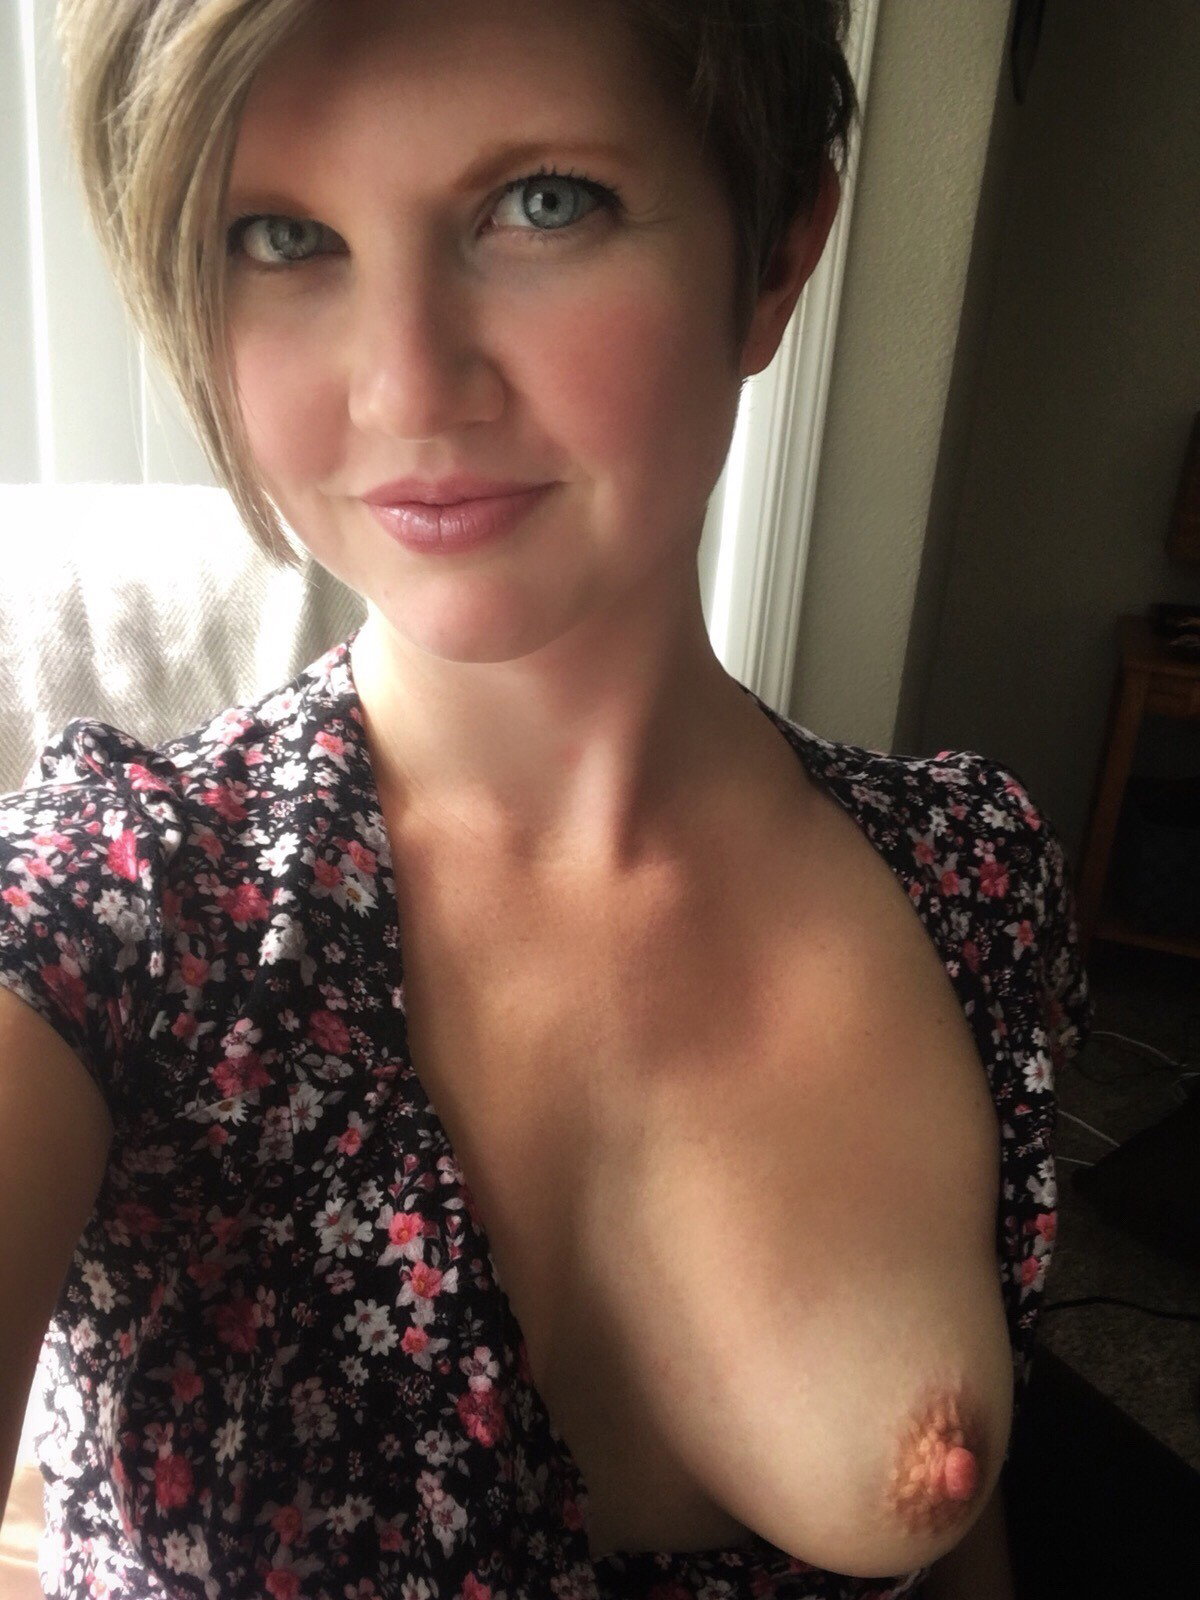 Shared Photo by 1HornyHubby with the username @1HornyHubby,  March 2, 2020 at 2:43 PM. The post is about the topic MILF and the text says 'On the outside I'm a loving wife, and sweet mother.
Inside, I'm a horny slut who's always ready to rock someone's world.

You can be both you know'